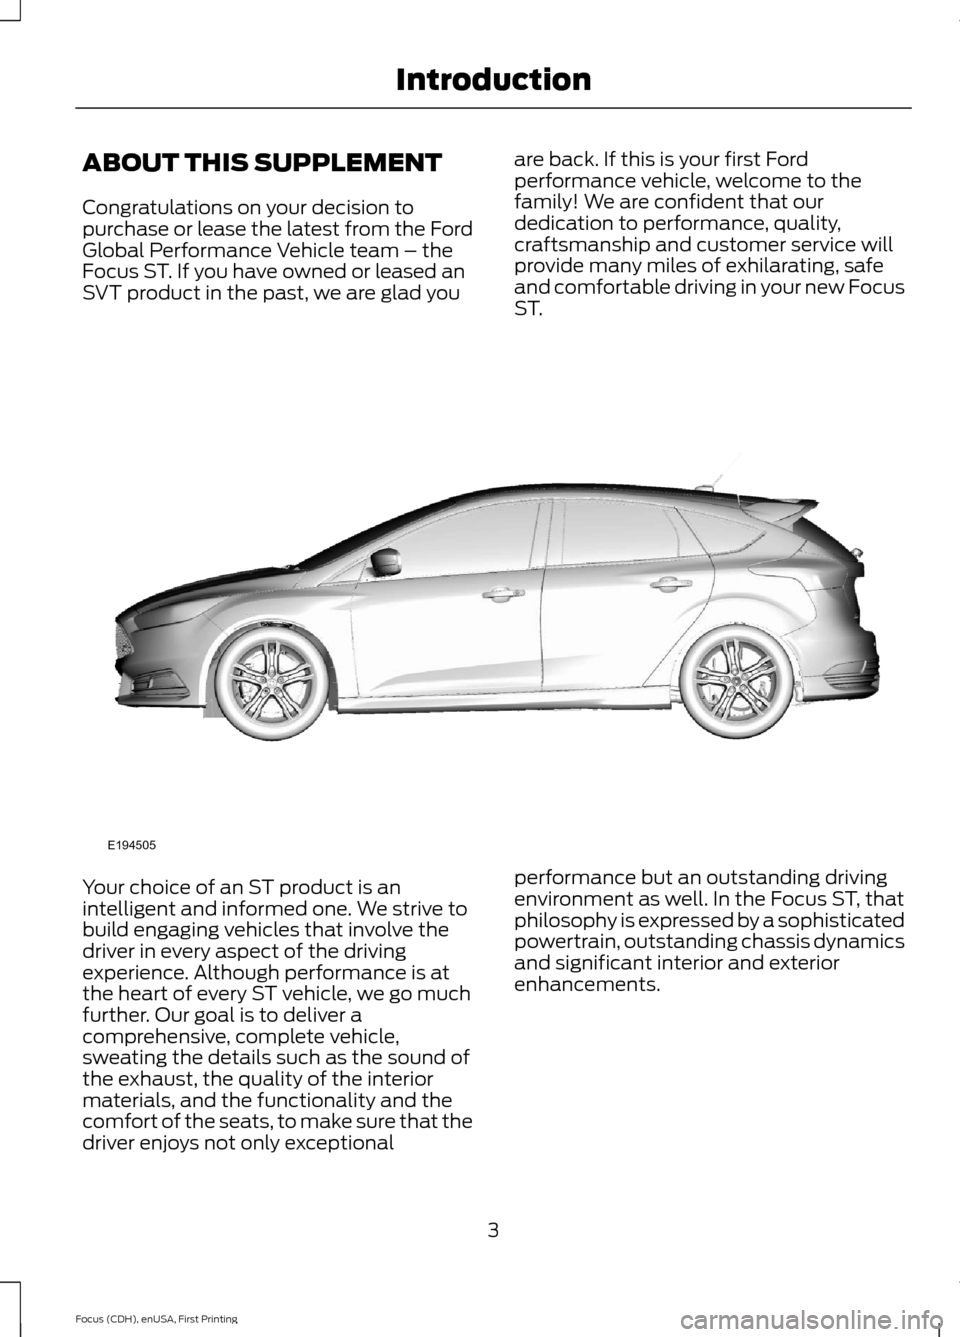 FORD FOCUS 2015 3.G ST Supplement Manual ABOUT THIS SUPPLEMENT
Congratulations on your decision topurchase or lease the latest from the FordGlobal Performance Vehicle team – theFocus ST. If you have owned or leased anSVT product in the pas